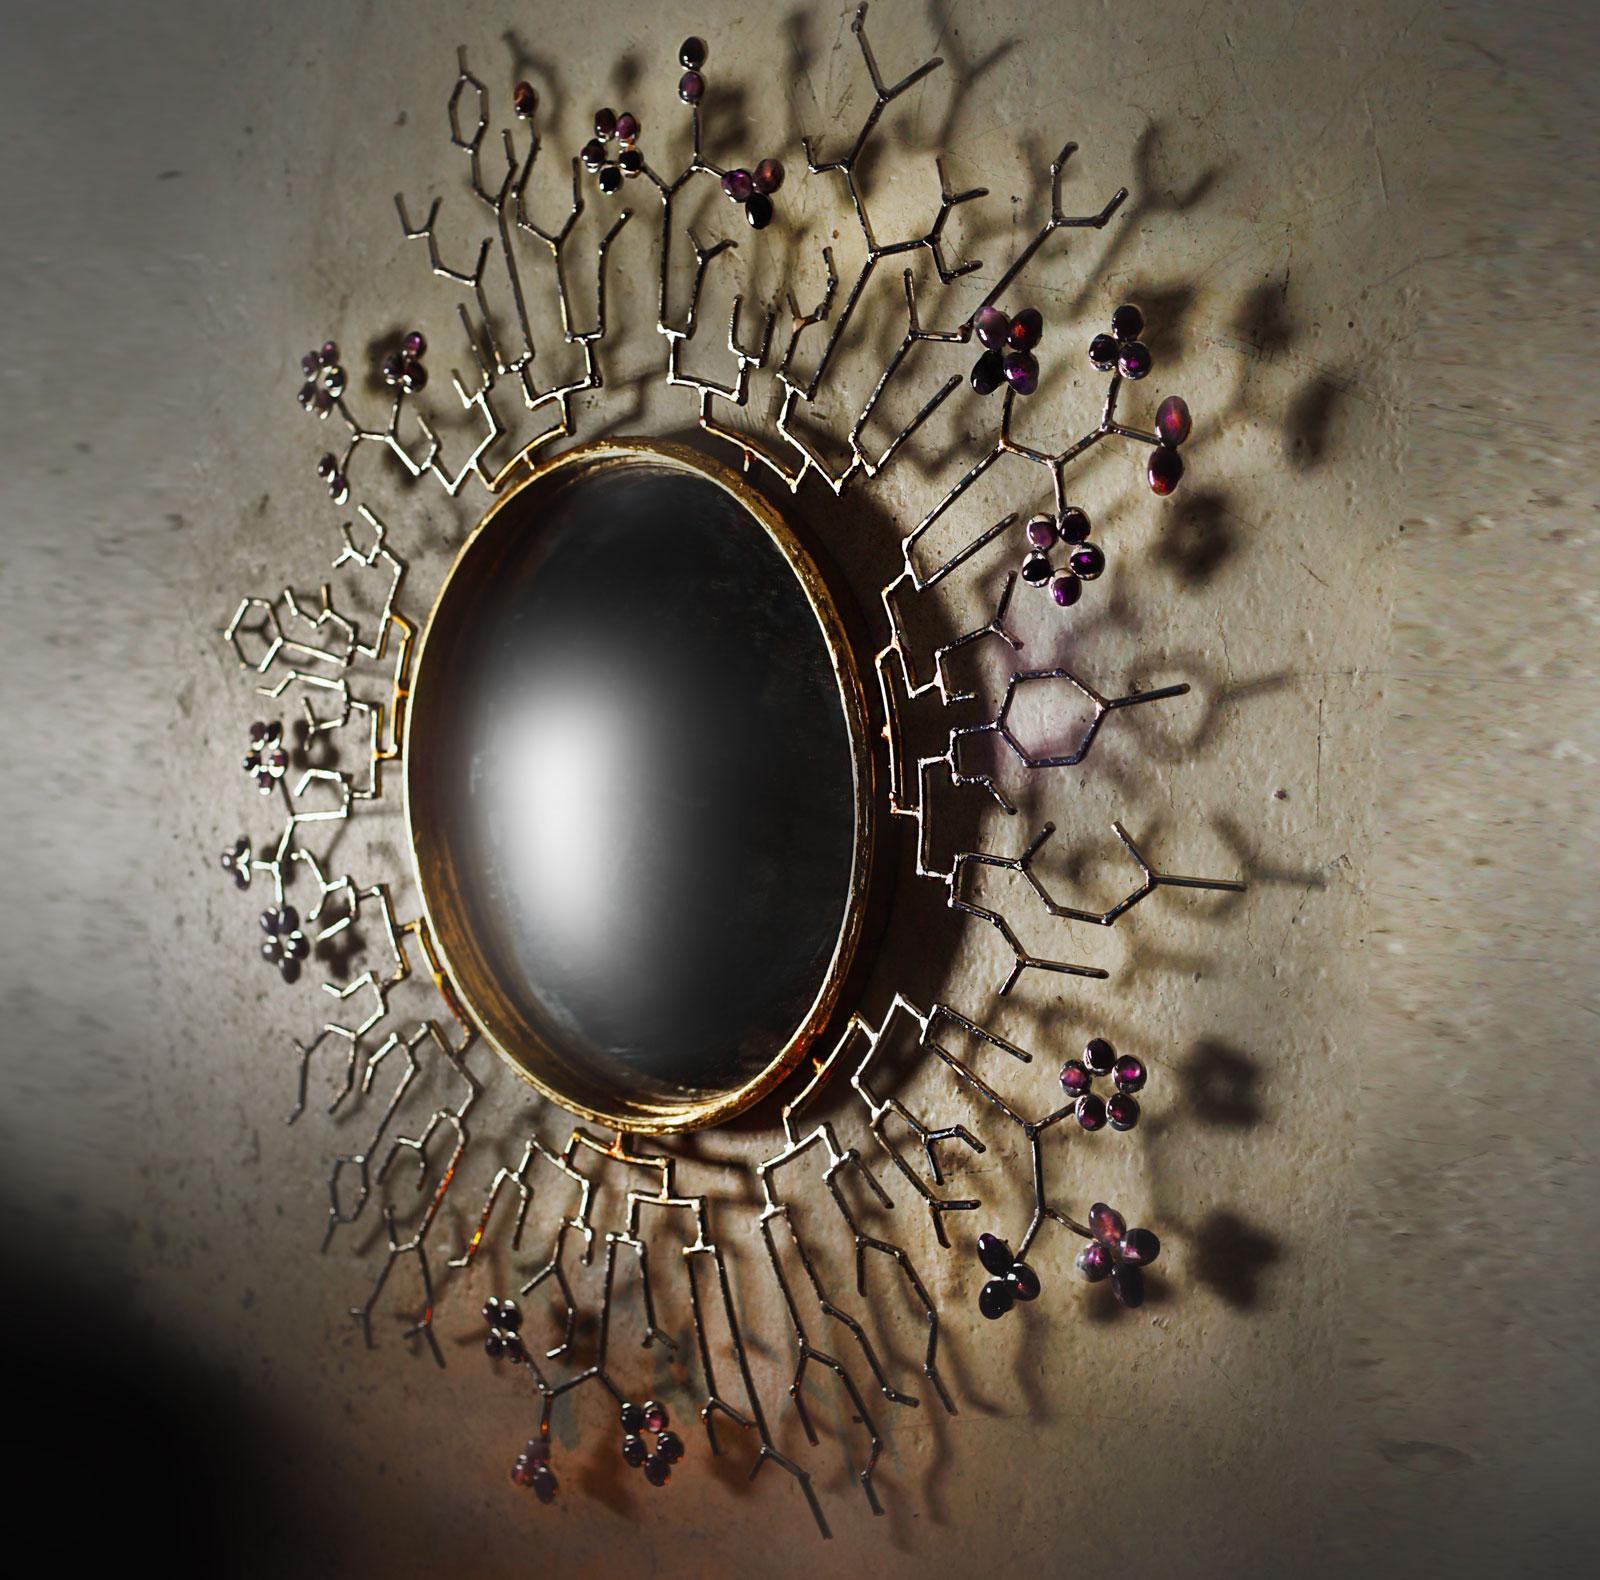 Mark Brazier-Jones, Naturmath mirror, 2021 nickel plated steel with gesso, gold leaf, amethysts stones and convex mirror, 110cm diameter. 

Mark Brazier-Jones (b.1956) is an internationally celebrated artist, master furniture and lighting